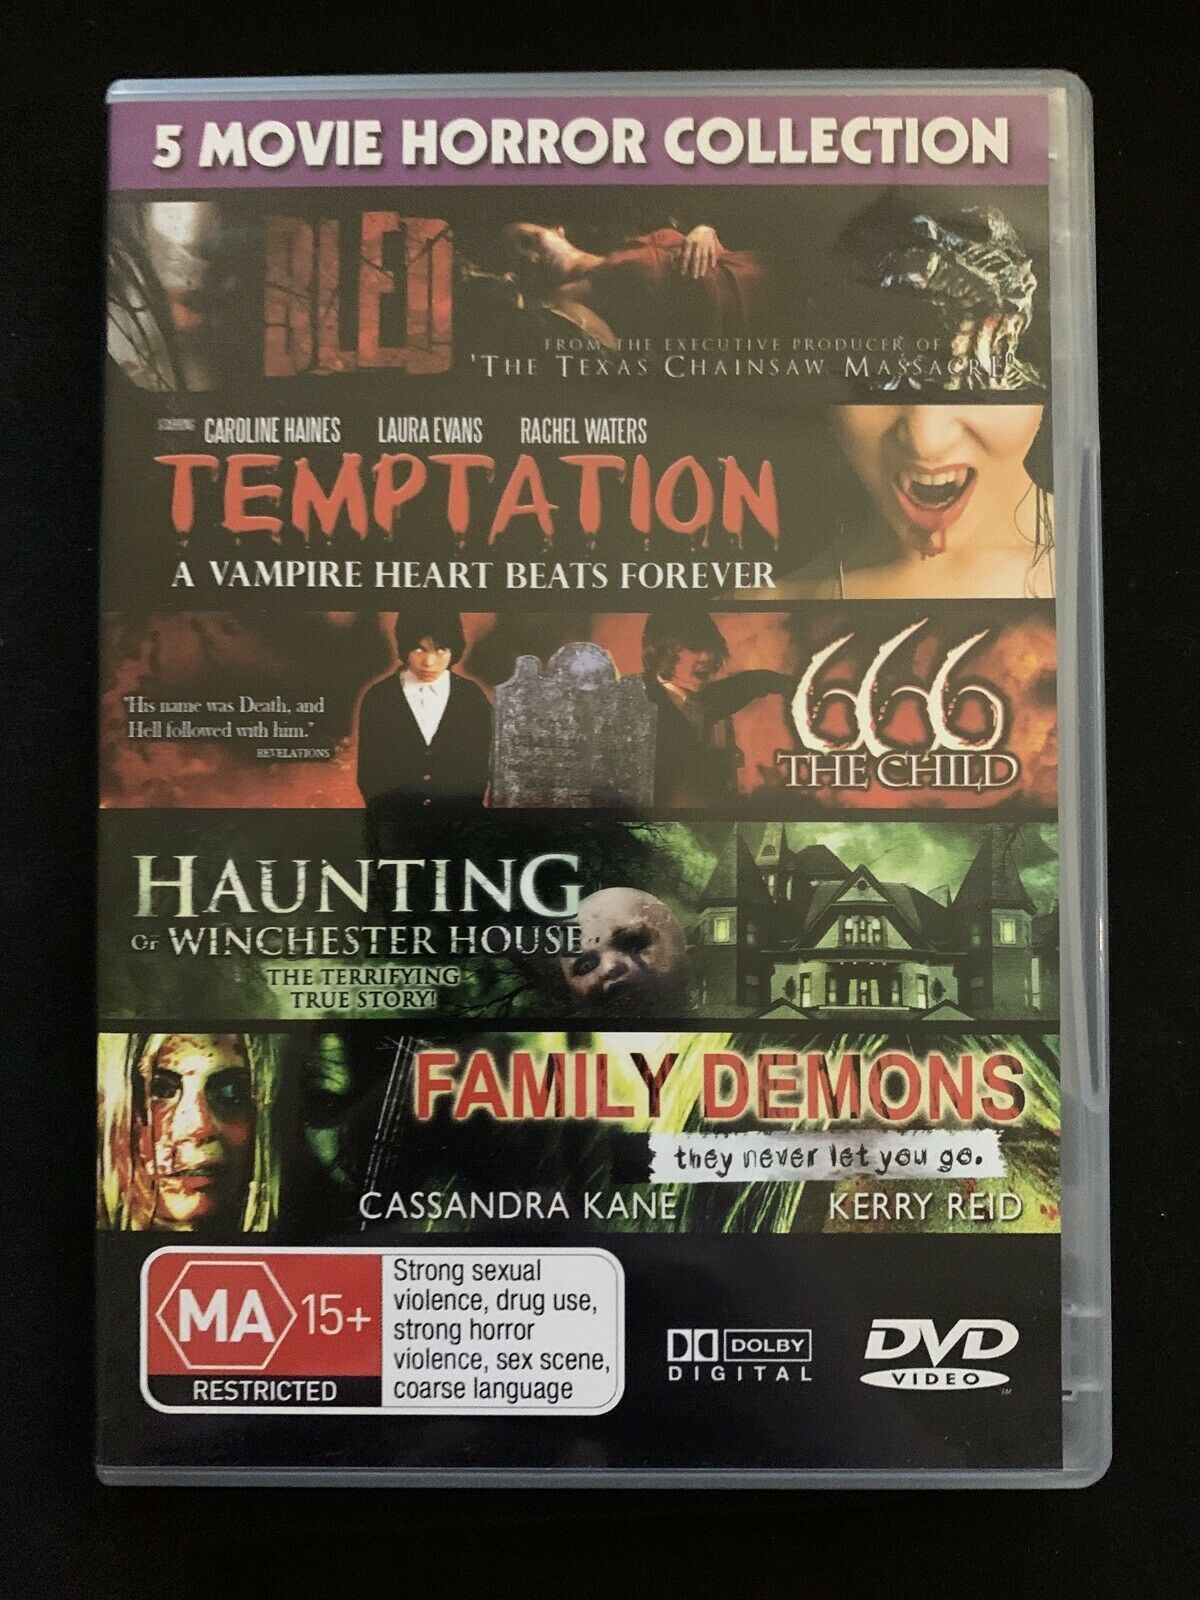 5 Horror Movies - Bled, Temptation, 666, Haunting, Family Demons - DVD